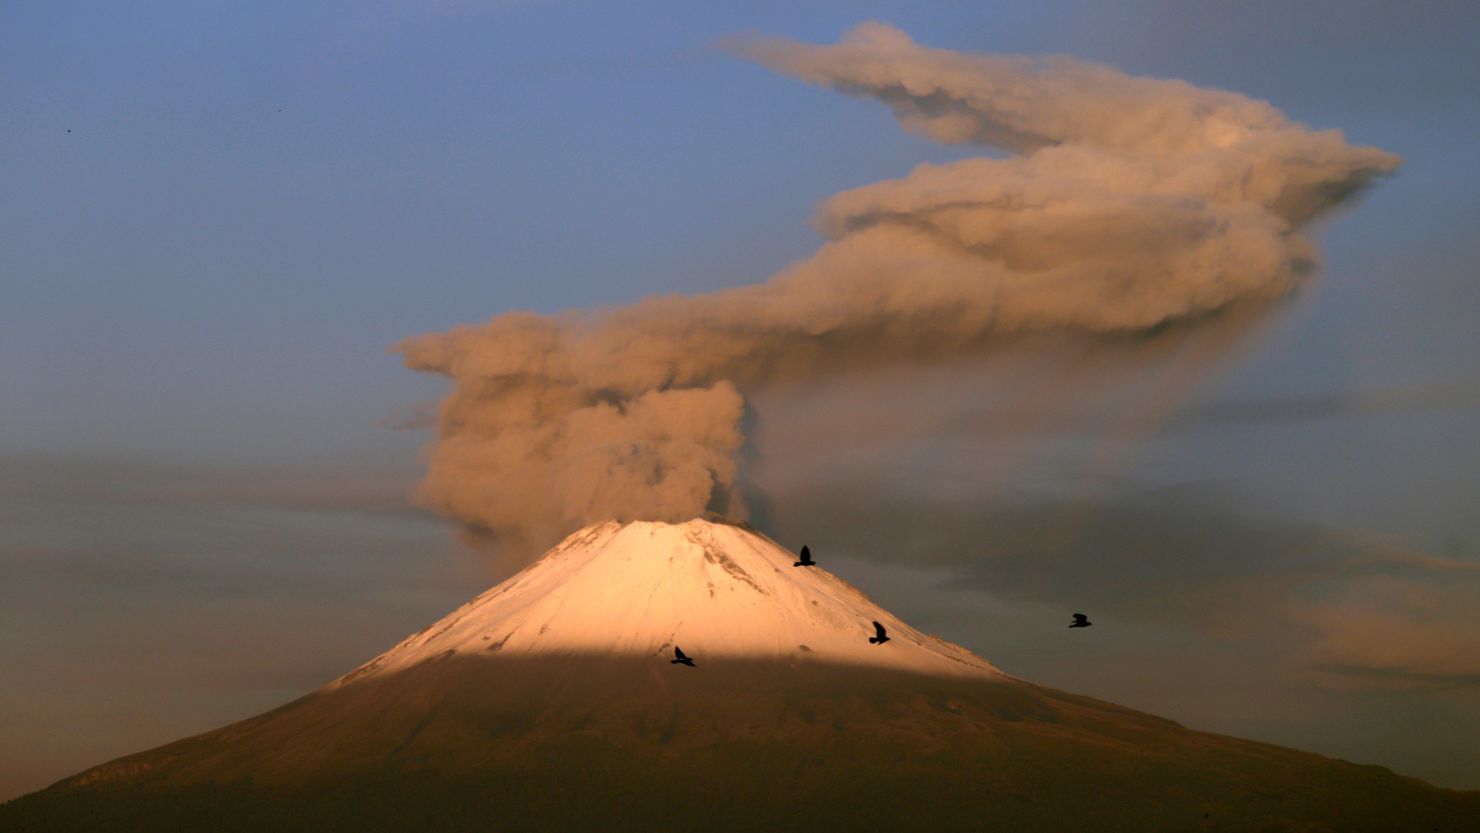 A  view of Popocatépetl's eruptions from the city of Puebla, Mexico, on October 2, 2019.